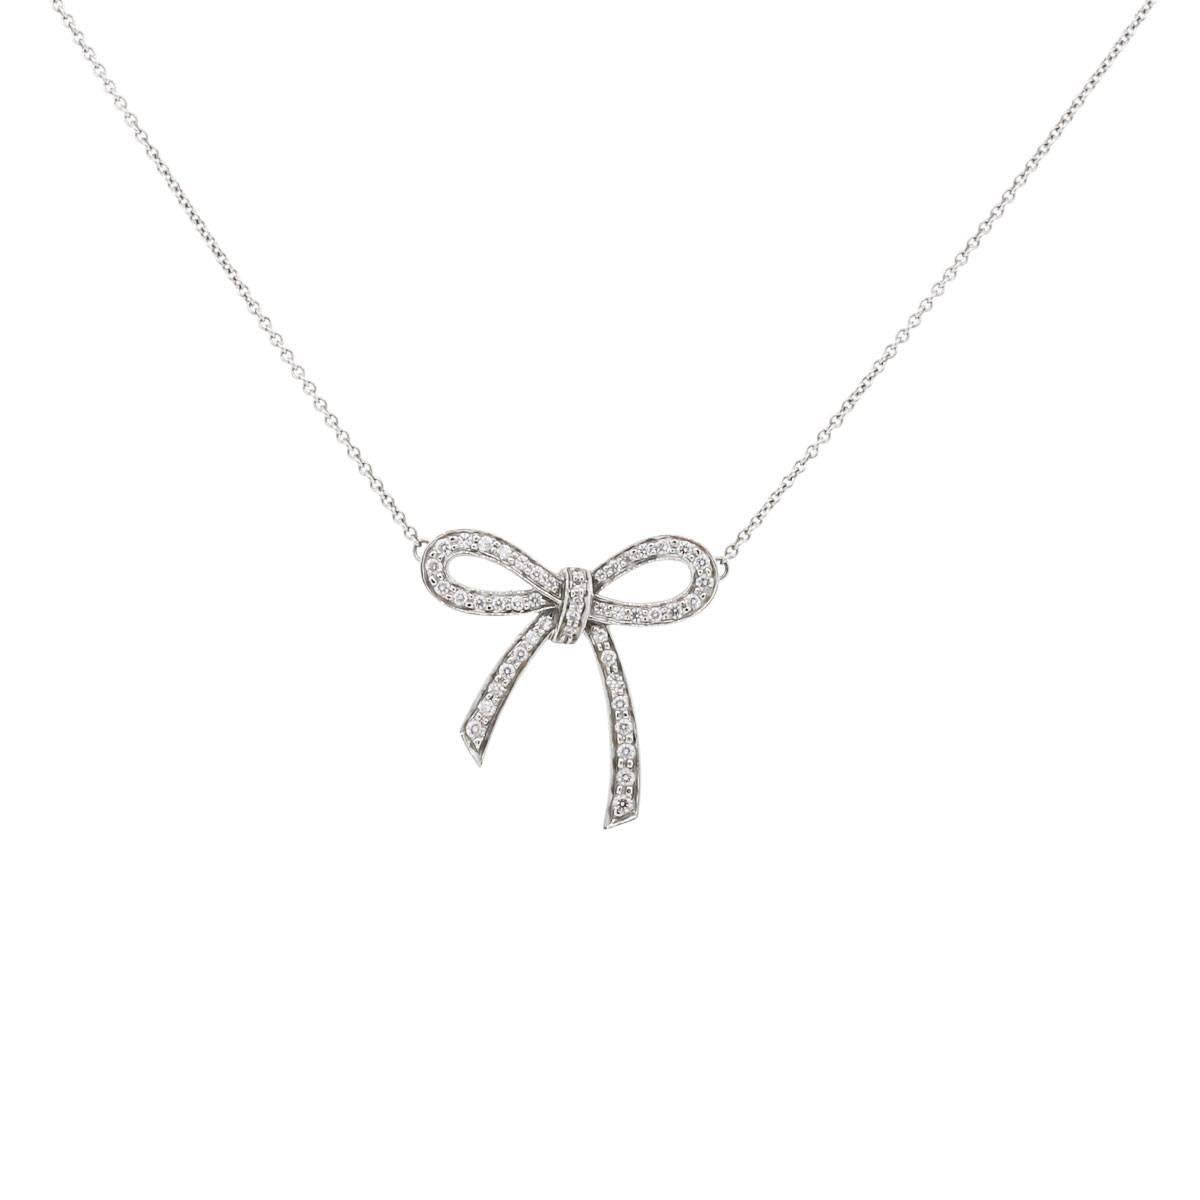 Style: Tiffany & Co. Platinum Diamond Bow Pendant Necklace
Length: Necklace is 16.25